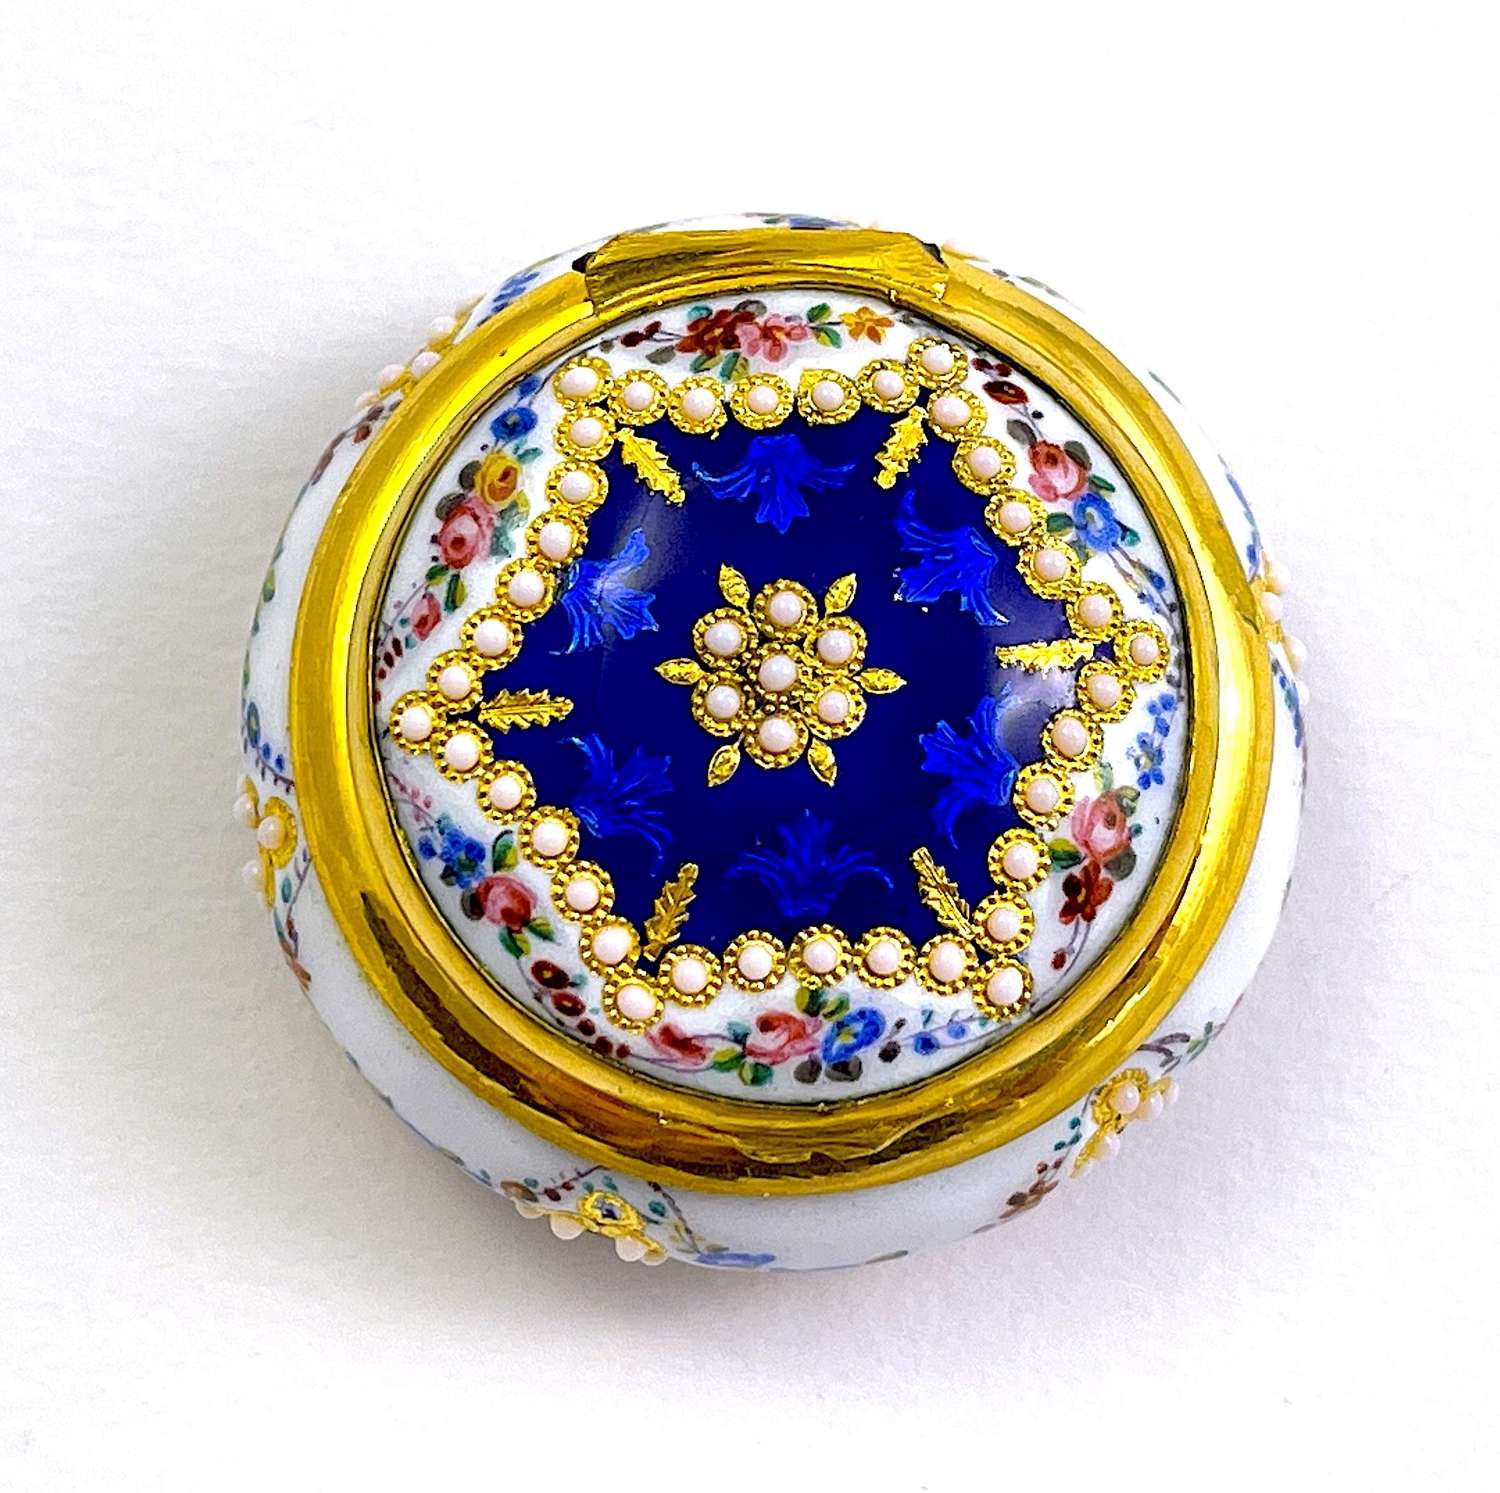 Antique French Enamel Pill Box Decorated with Flowers and Raised Jewel